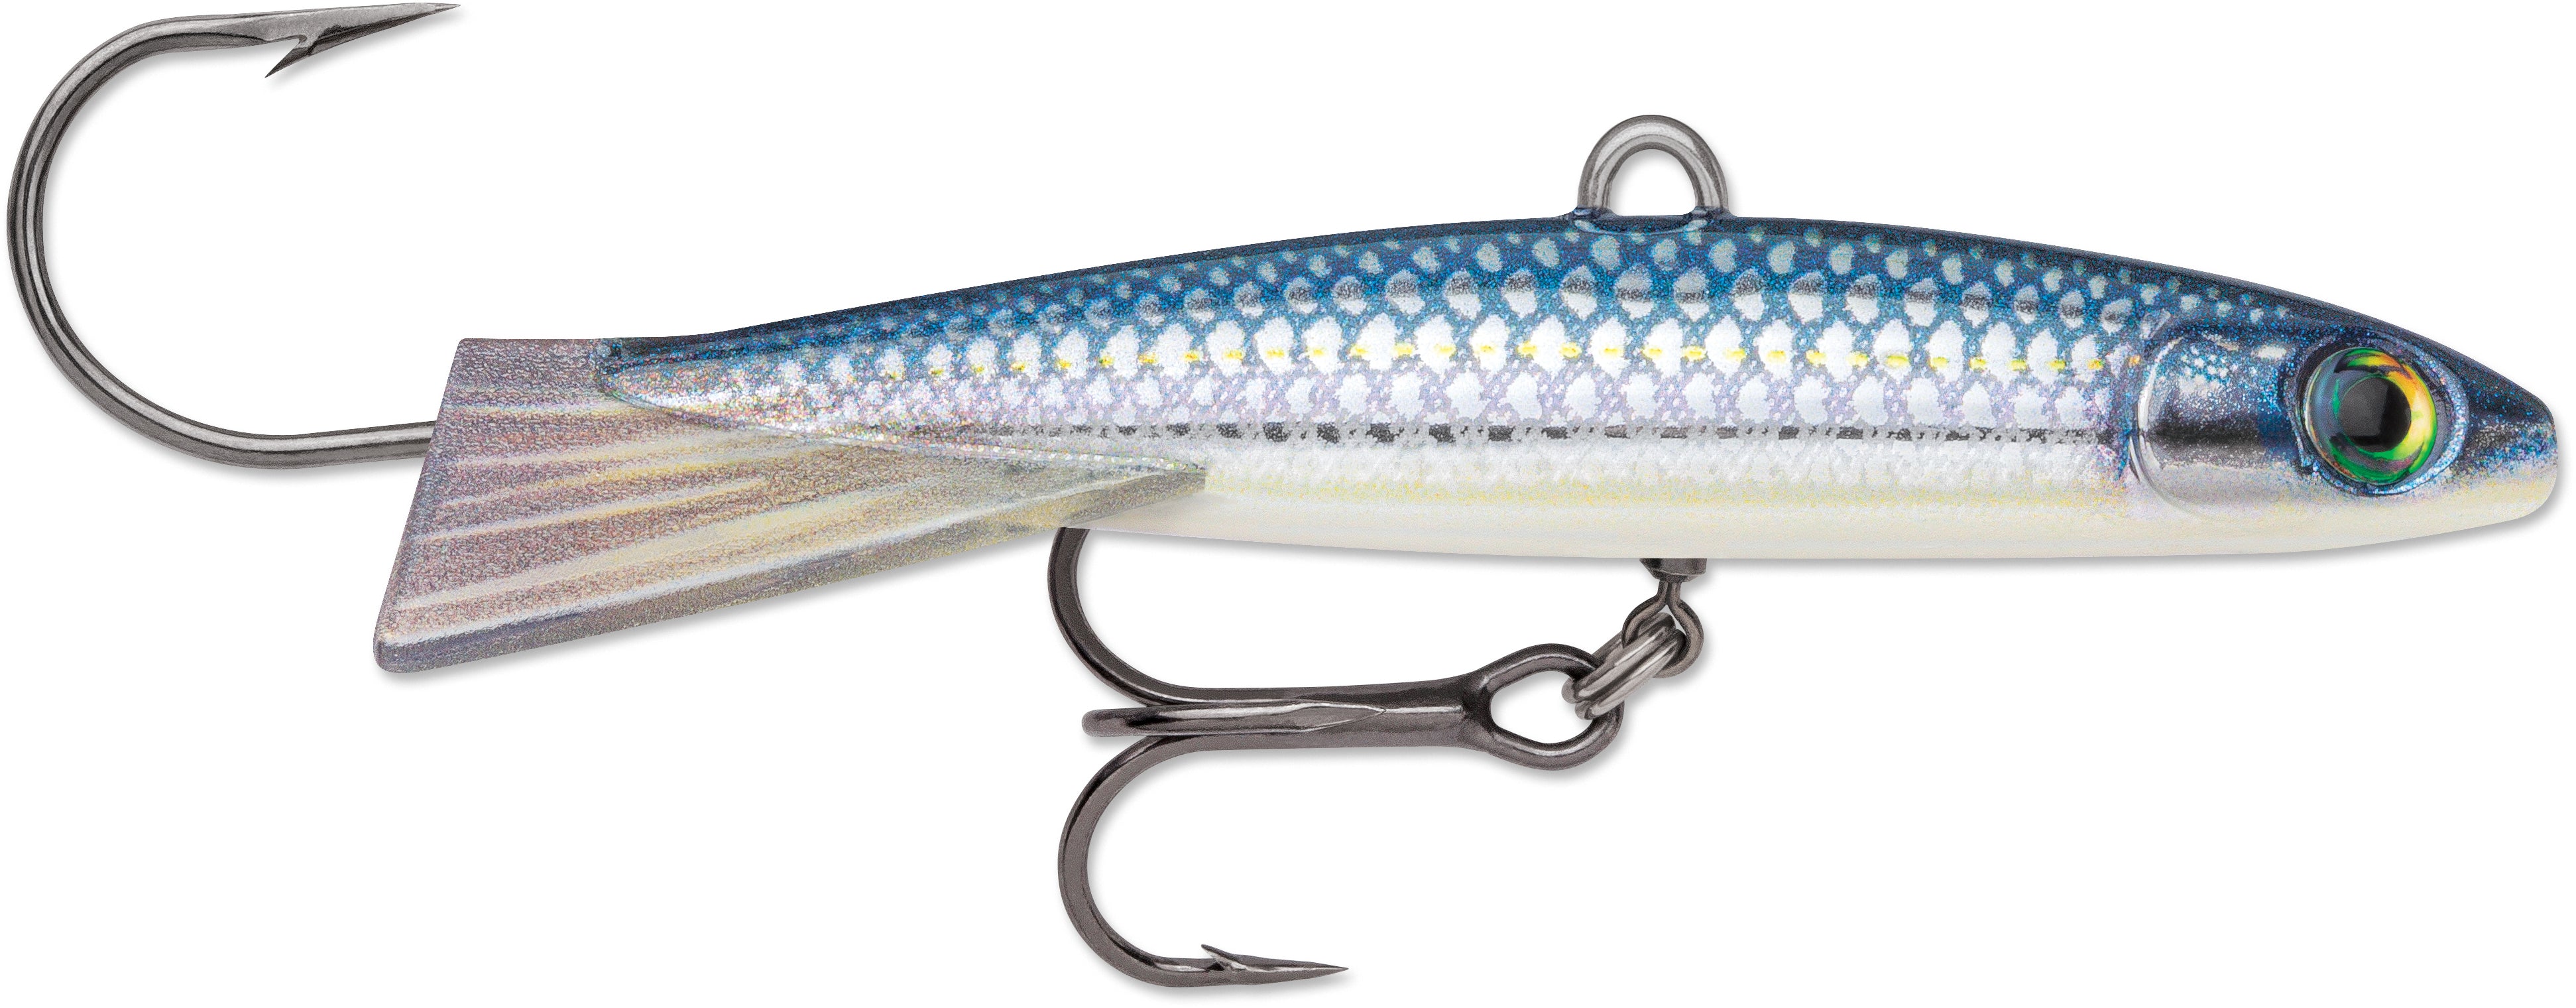 vertical jigging lures, vertical jigging lures Suppliers and Manufacturers  at